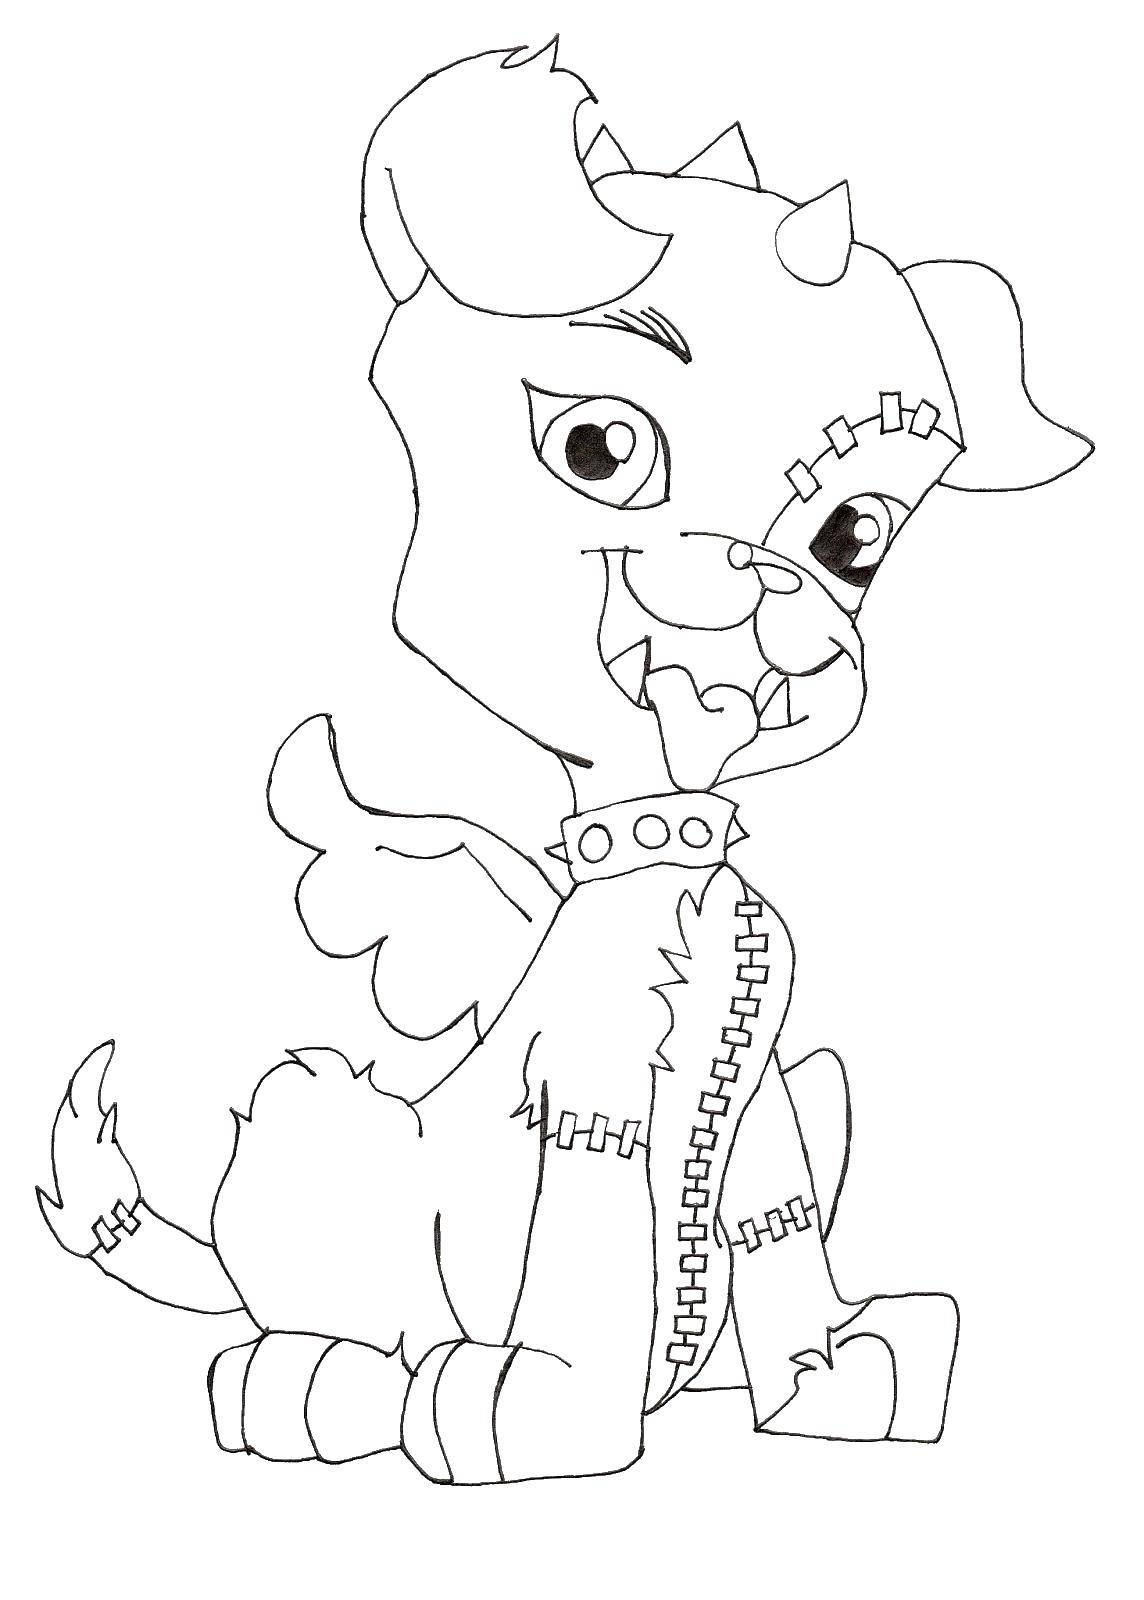 Coloring Pet Frankie watzit. Category Monster high. Tags:  Monster high, pet, Frankie, watzit.